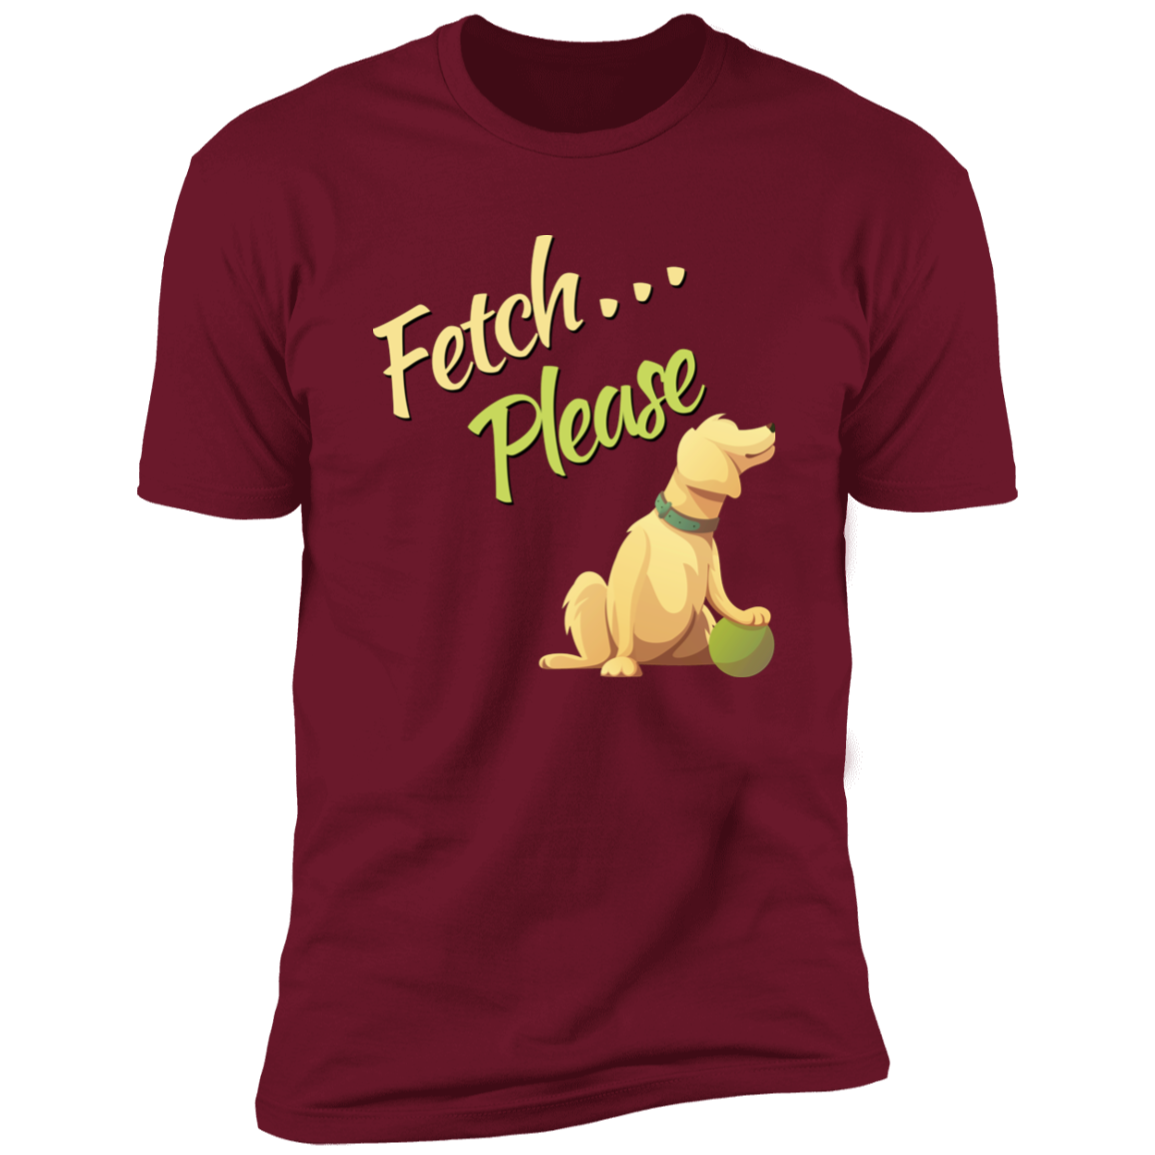 Fetch Please funny dog t-shirt, funny dog shirt for humans, cardinal red